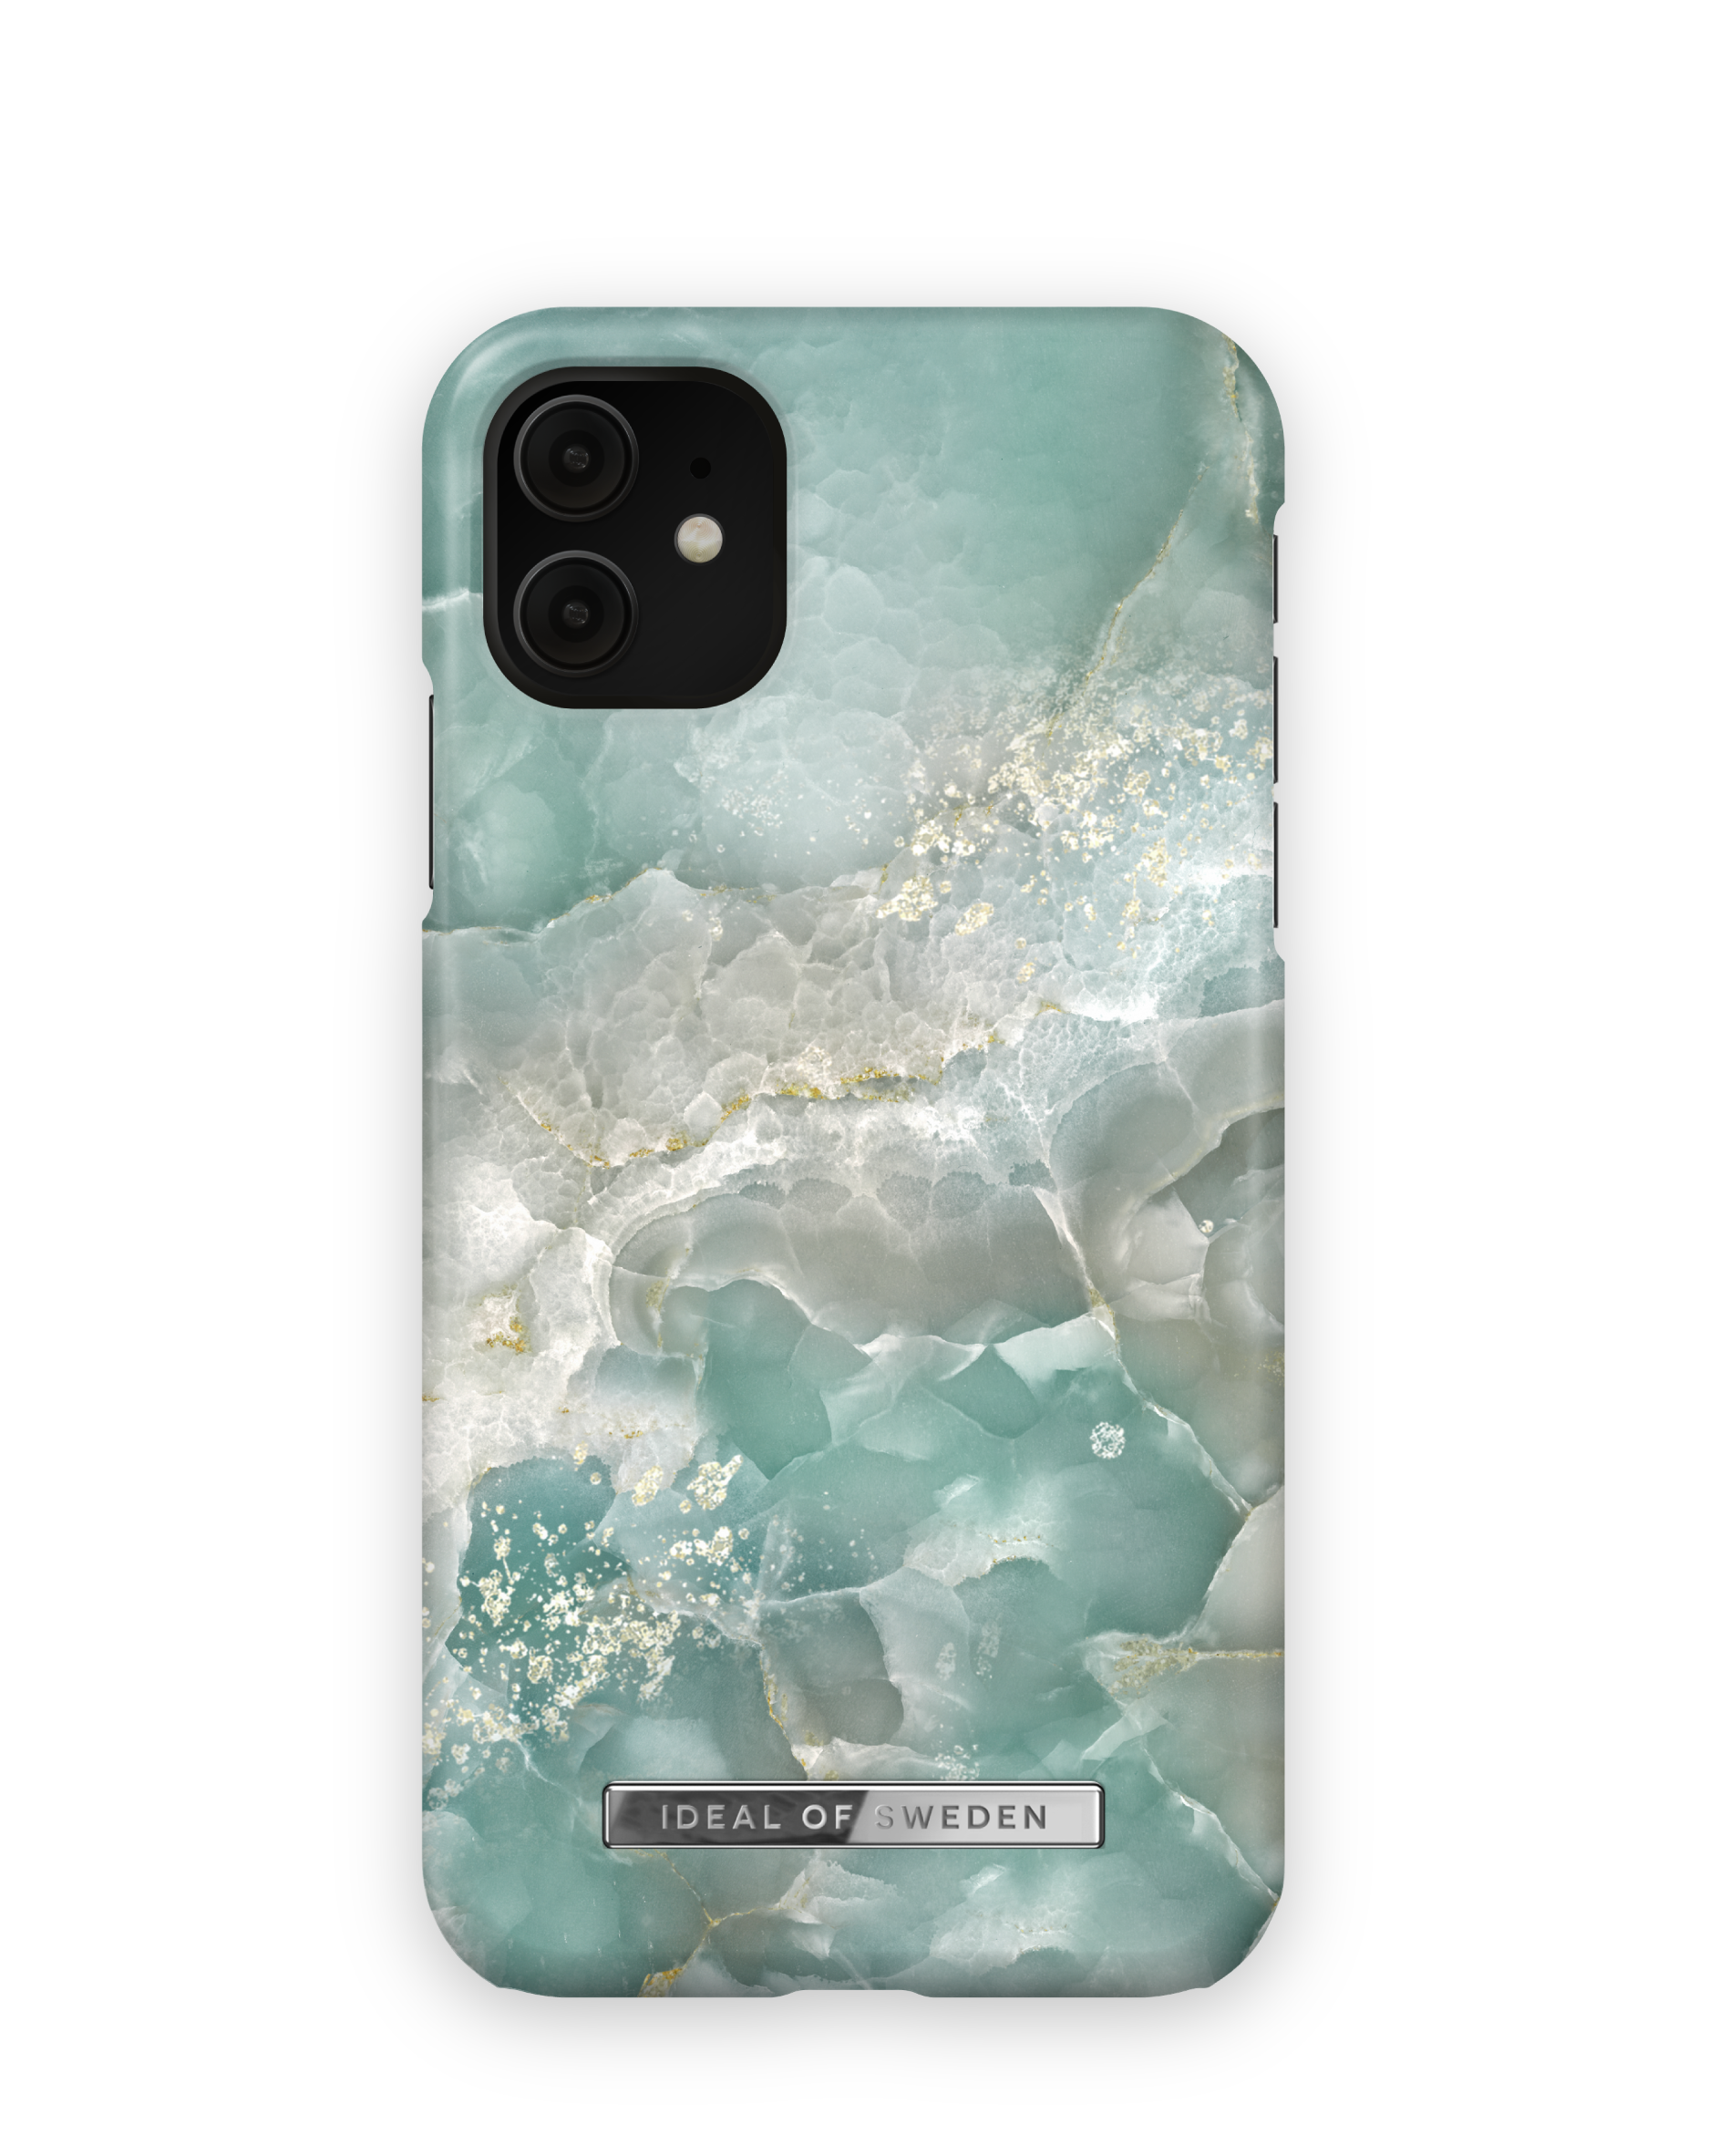 IDFCSS22-I1961-391, Apple, Backcover, / 11 iPhone Azura SWEDEN Marble OF IDEAL XR, iPhone